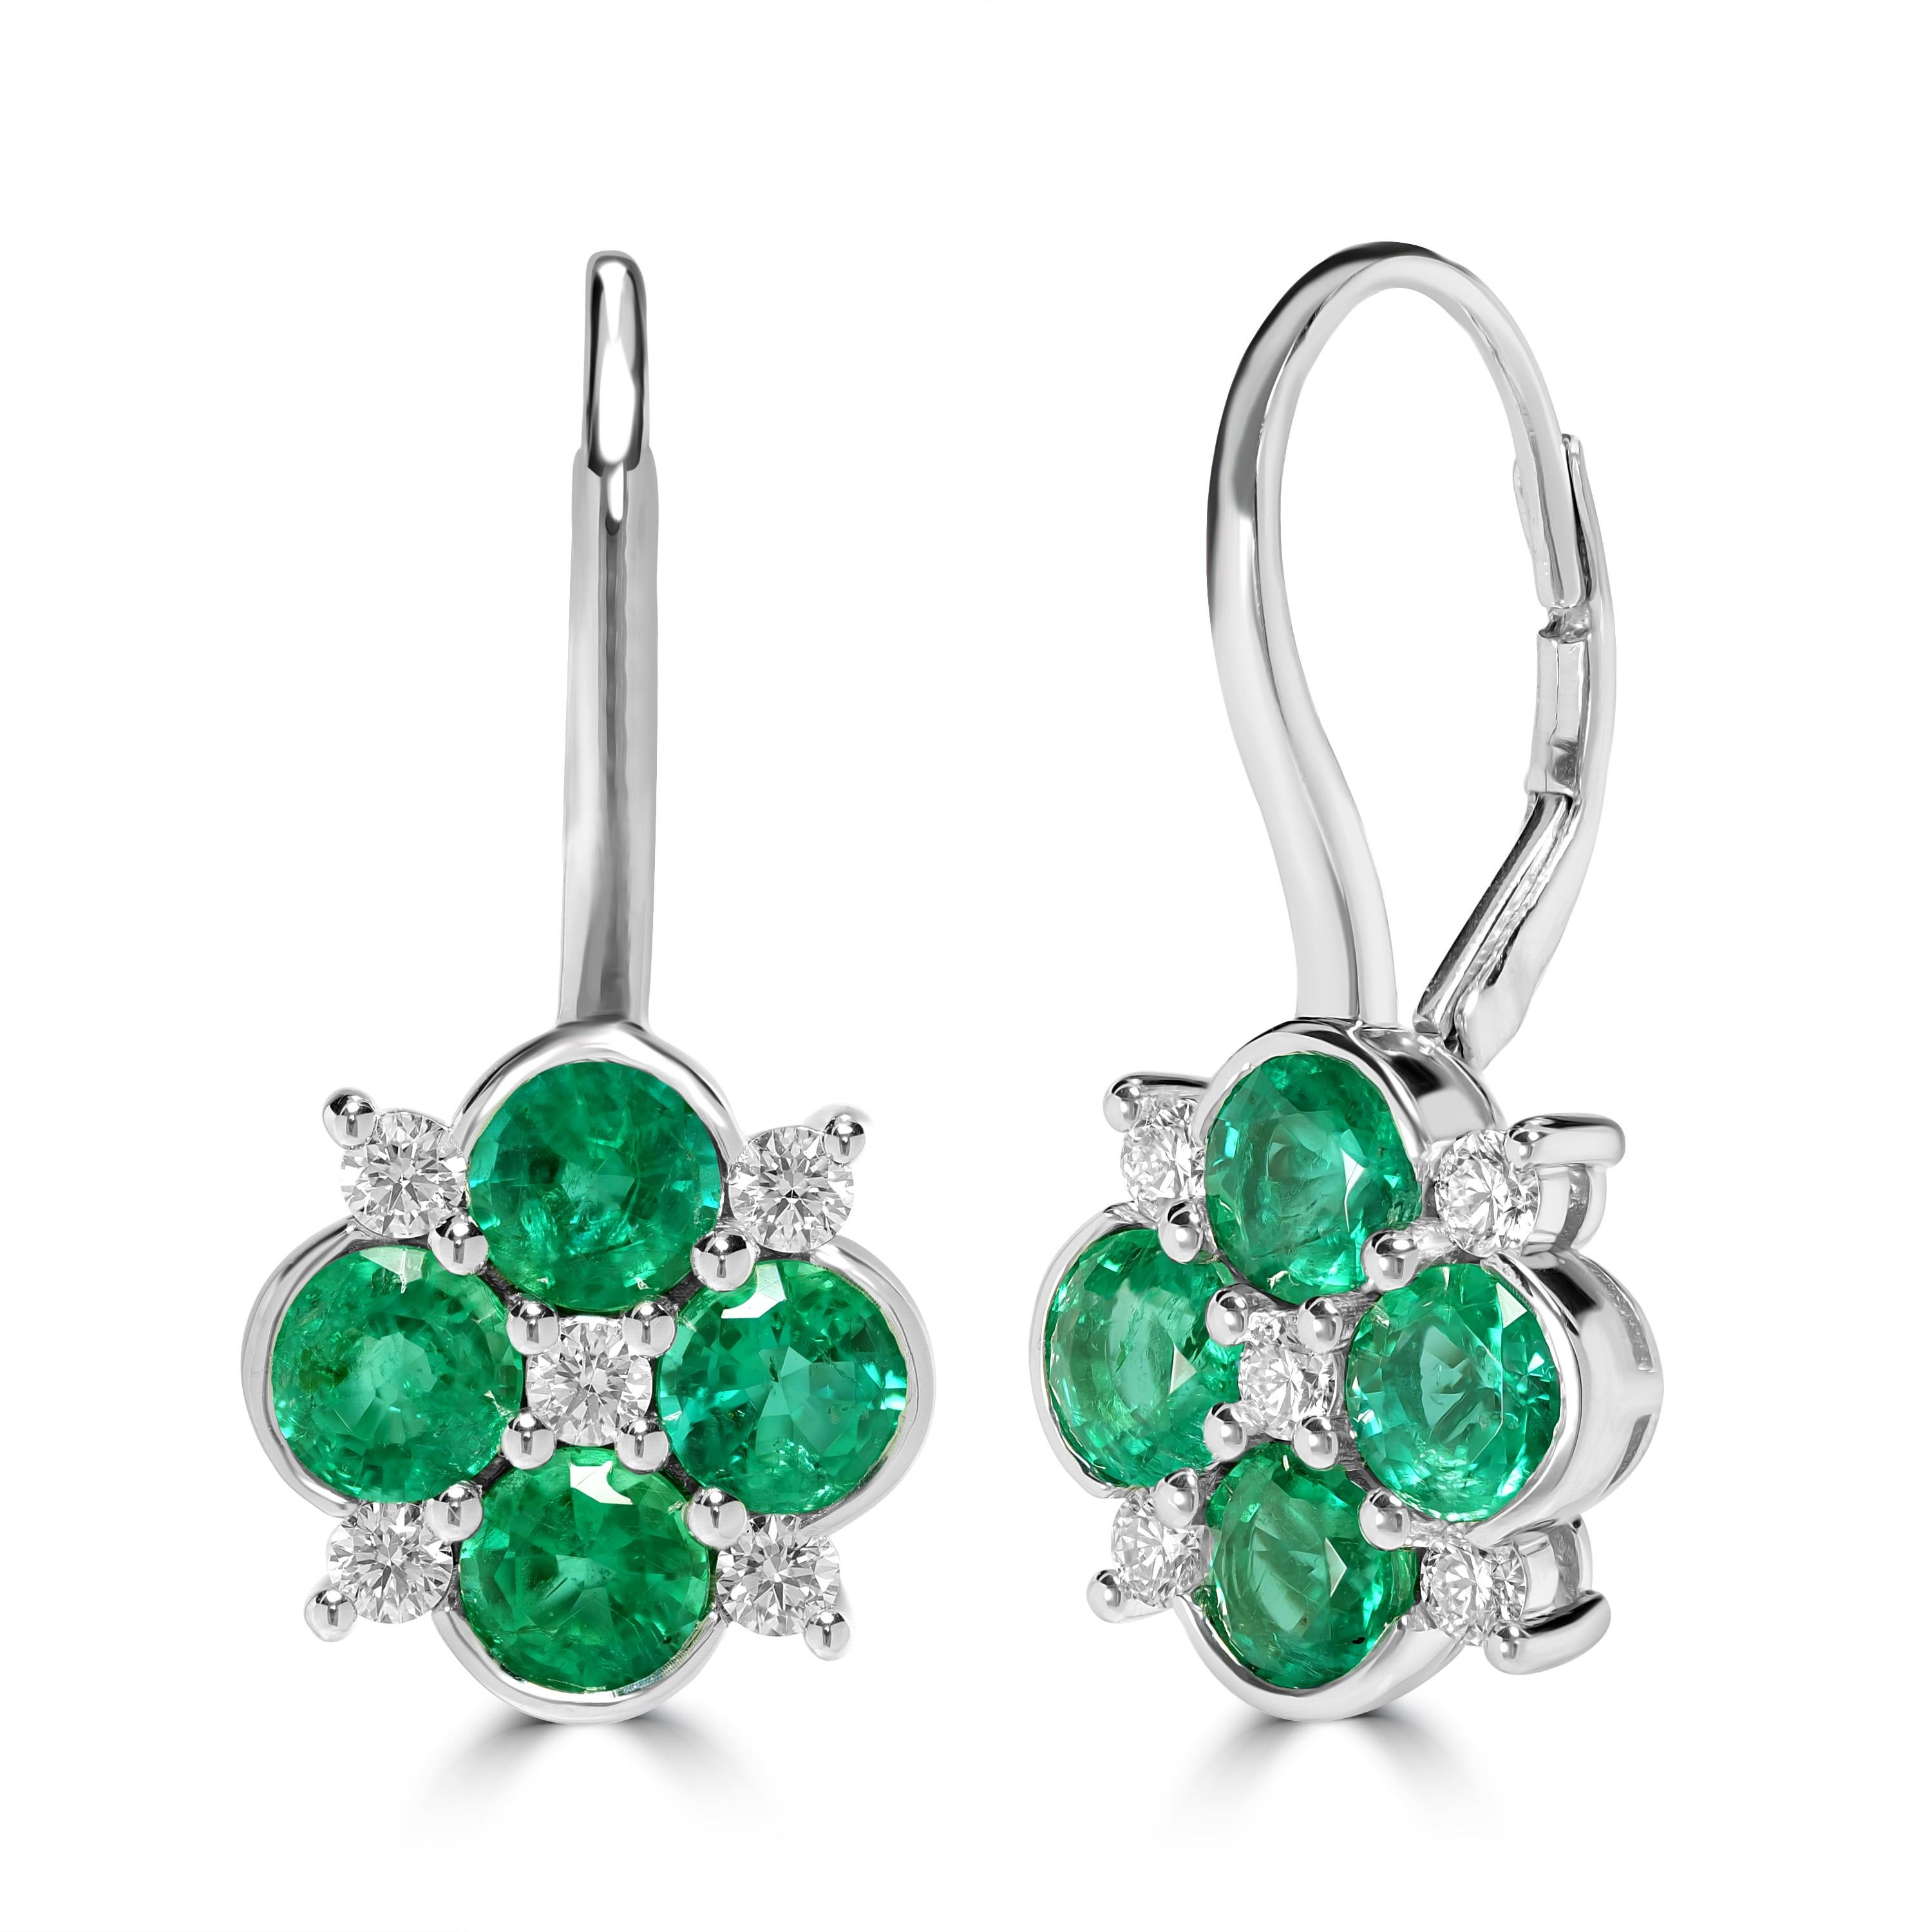 This clover leaf dangle earrings are from of emeralds and diamonds set in 18k white gold. The emeralds used are   from Zambia known for their bluish green emerald which are the natures best version of emerald. The diamonds used are of G-H color and